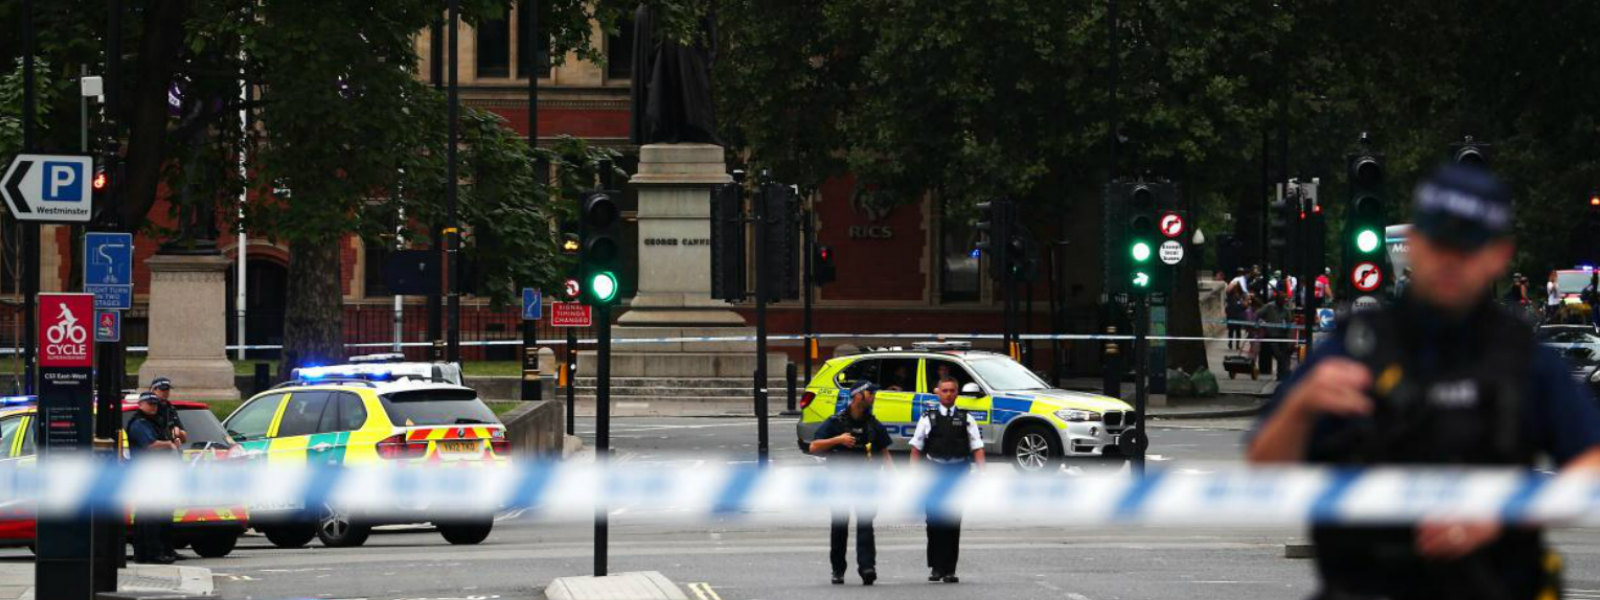 Man held as car crashes outside UK parliament